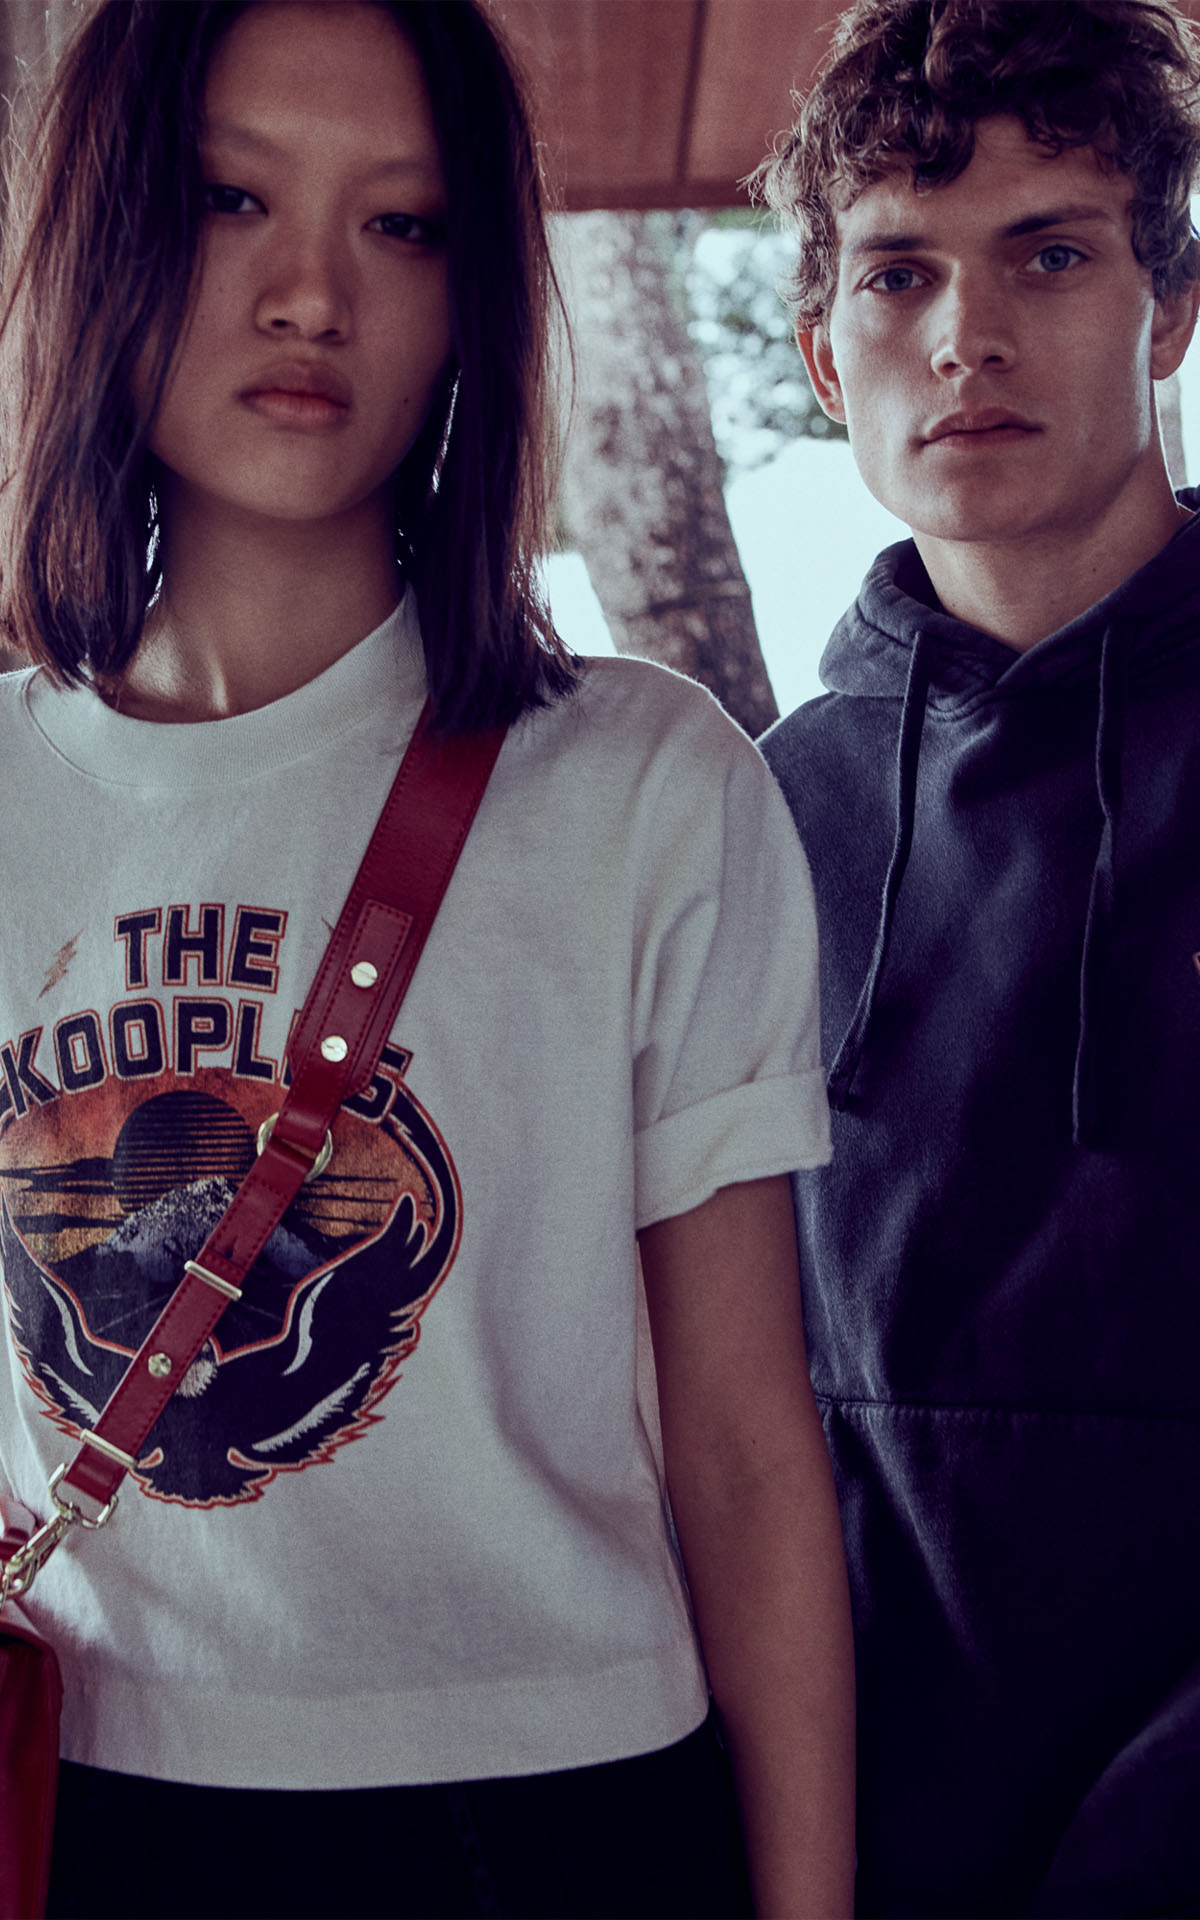 Couple with The Kooples clothes